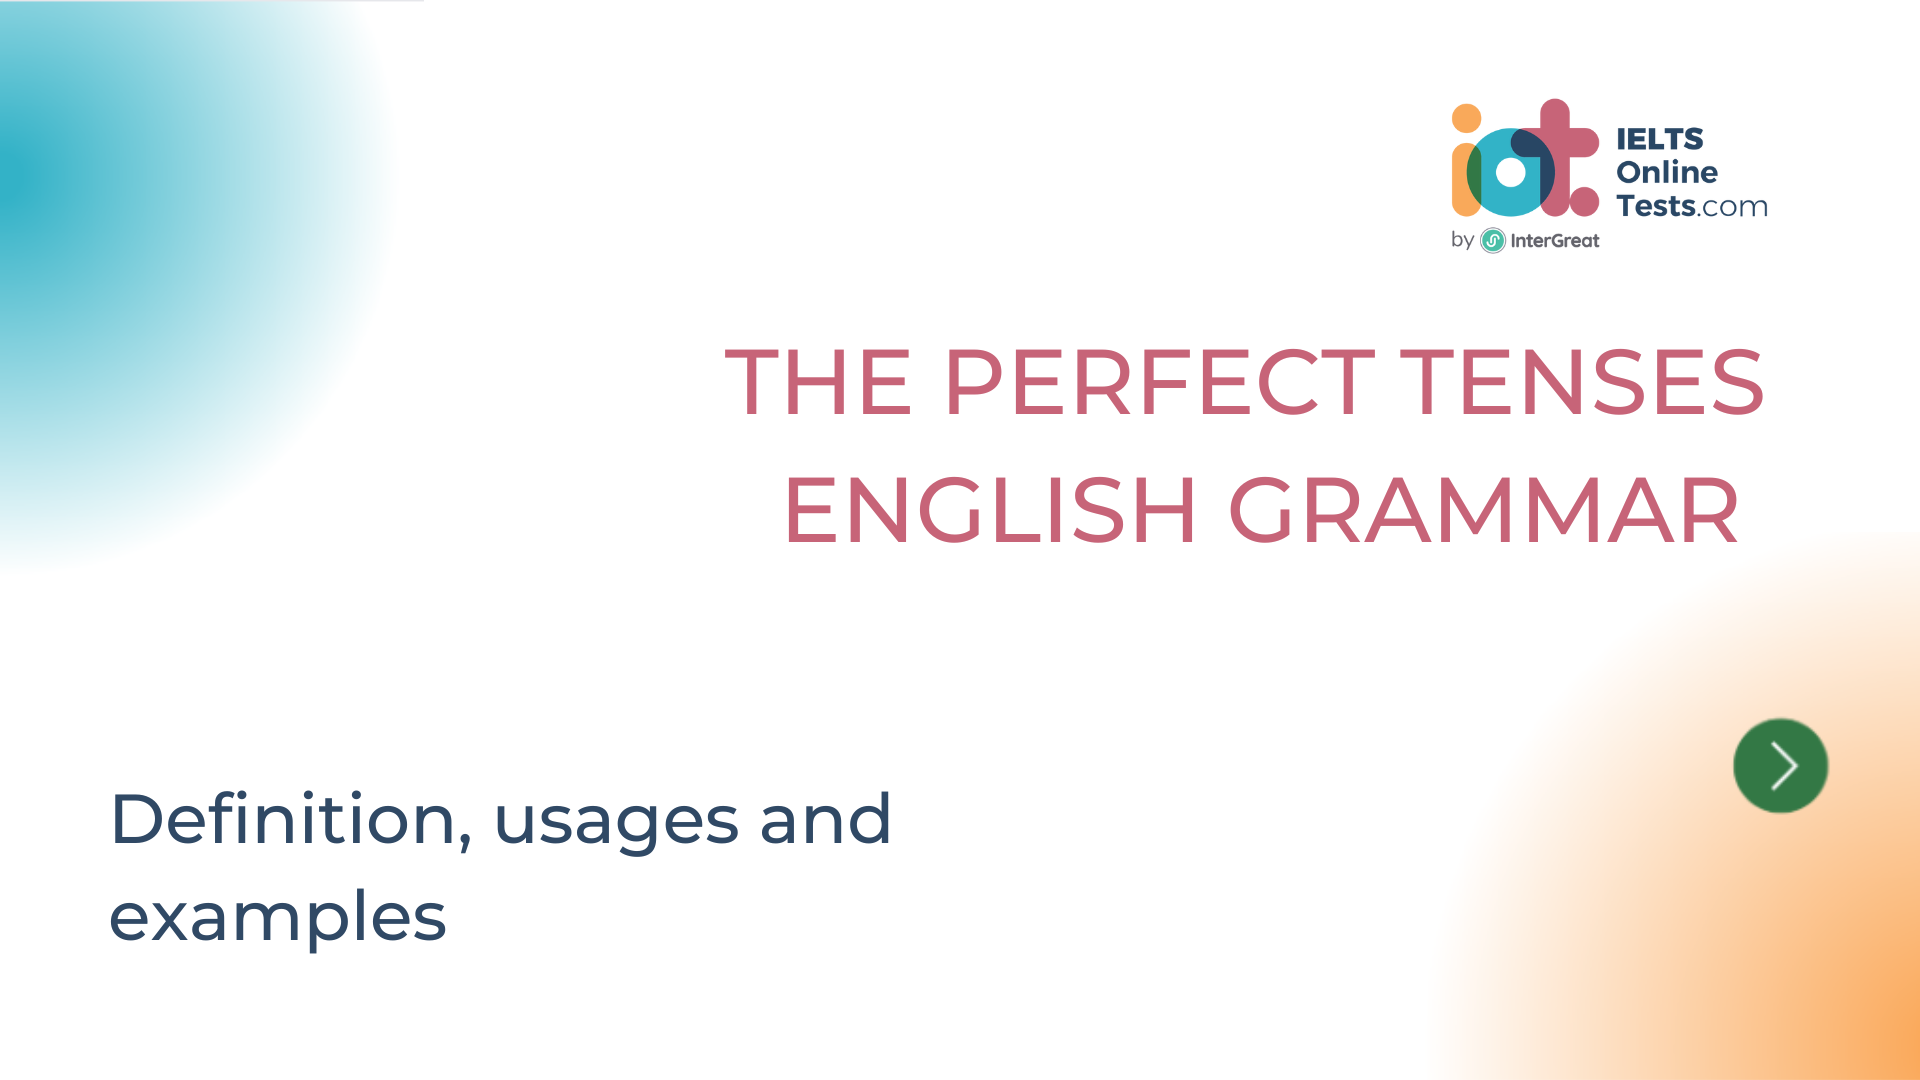 The perfect tenses in English grammar